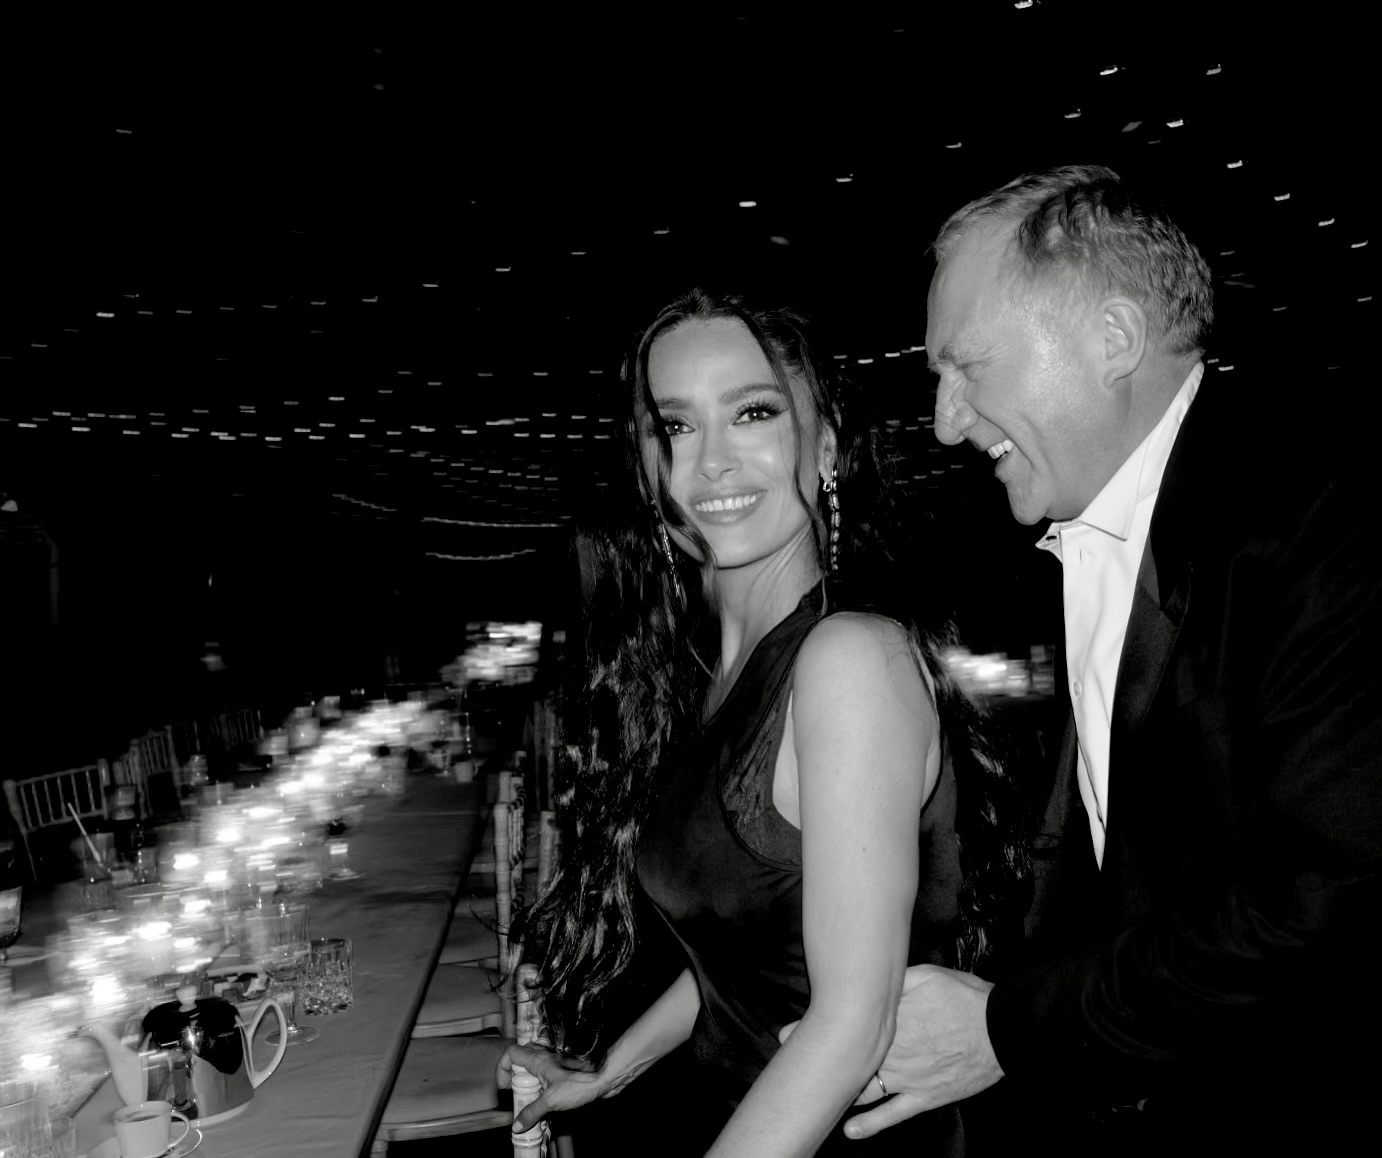 Photo by Salma Hayek Pinault on February 14 2024. May be a black and white image of 2 people makeup dinner jacket dress and